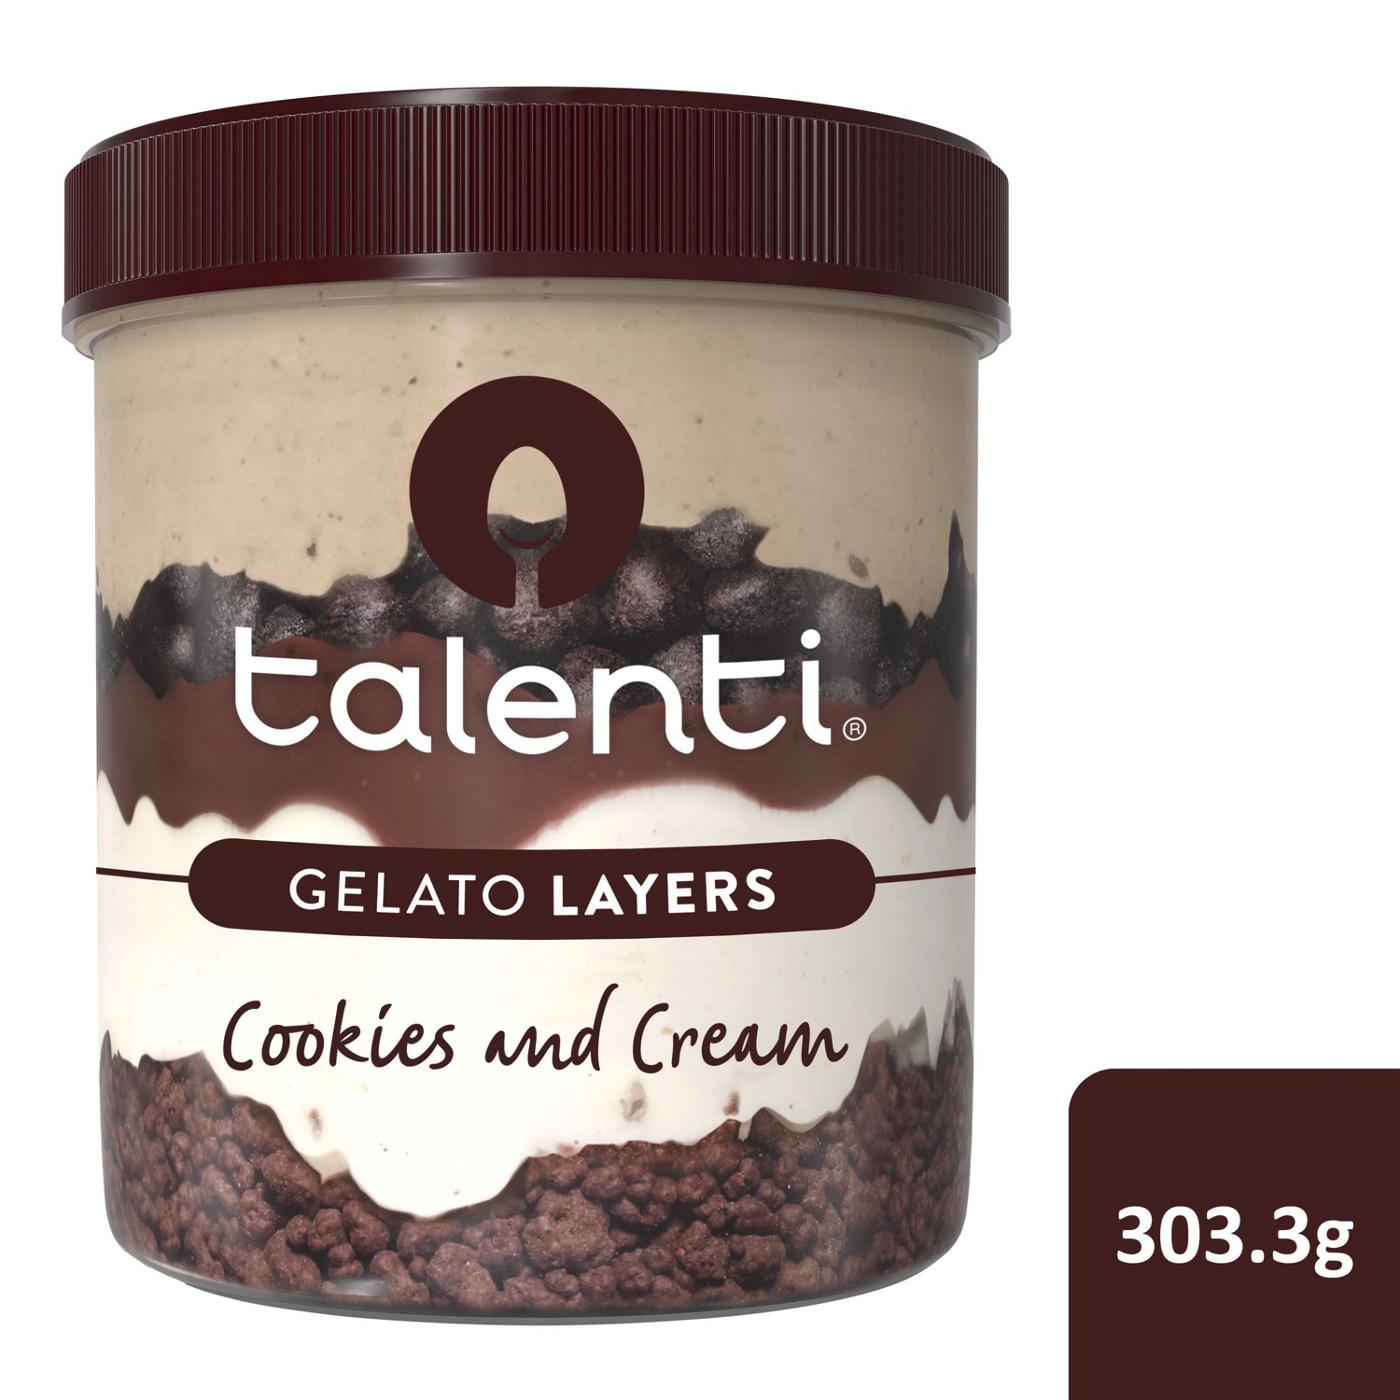 Talenti Gelato Layers Cookies and Cream; image 2 of 2